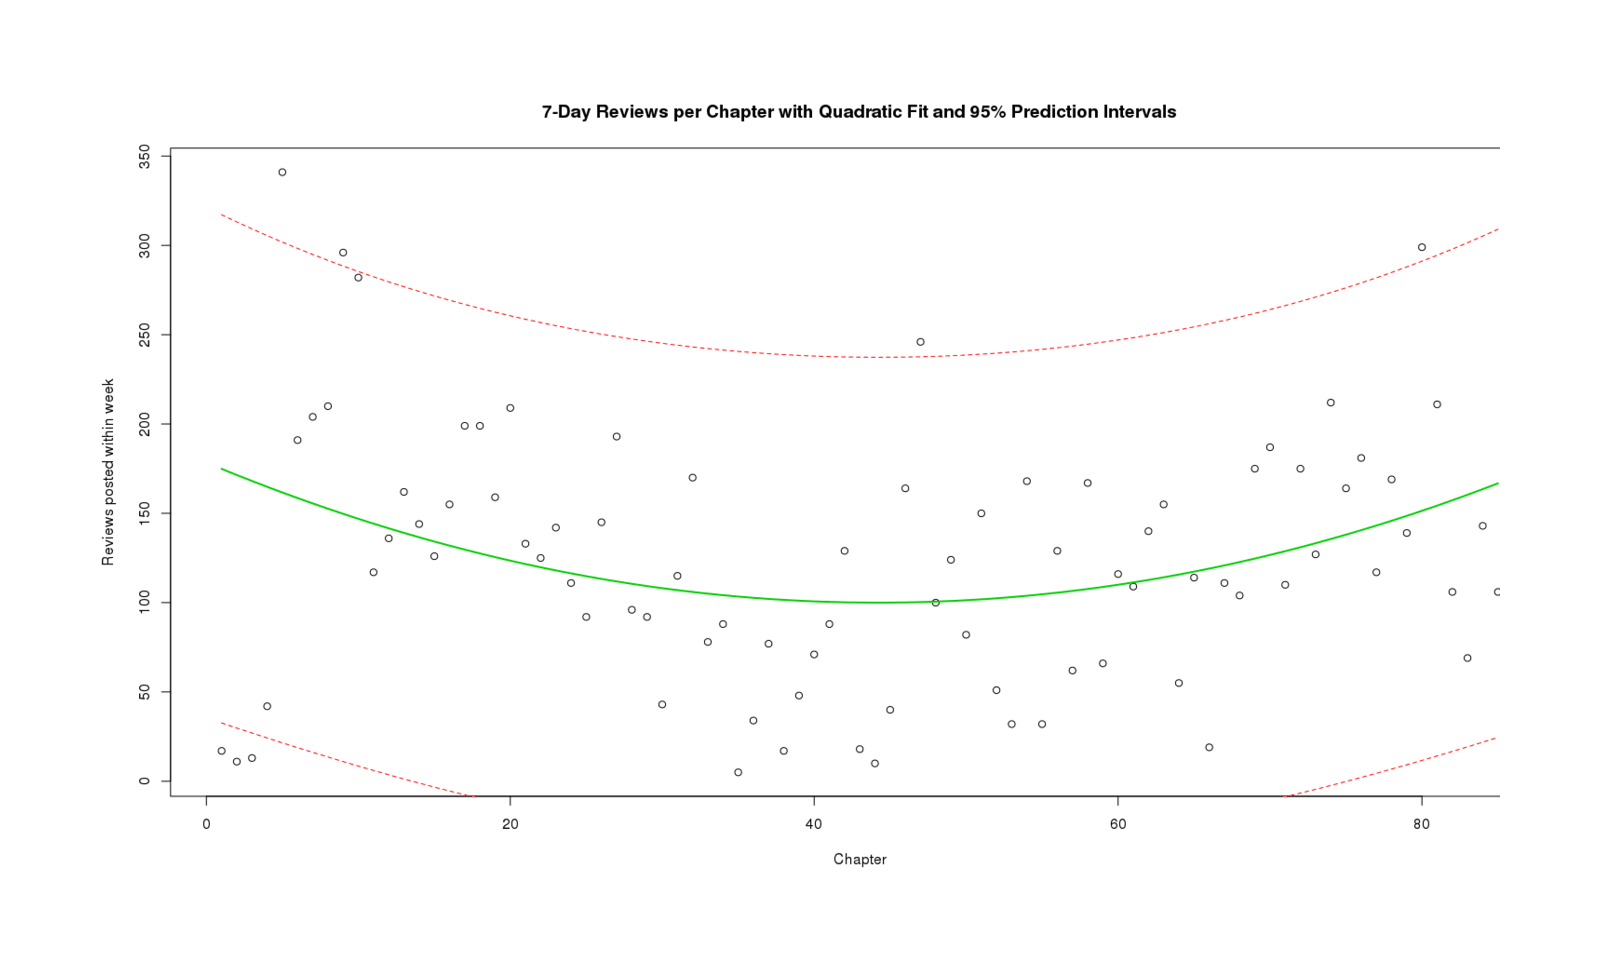 7-Day Reviews per Chapter with Quadratic Fit and 95% Prediction Intervals